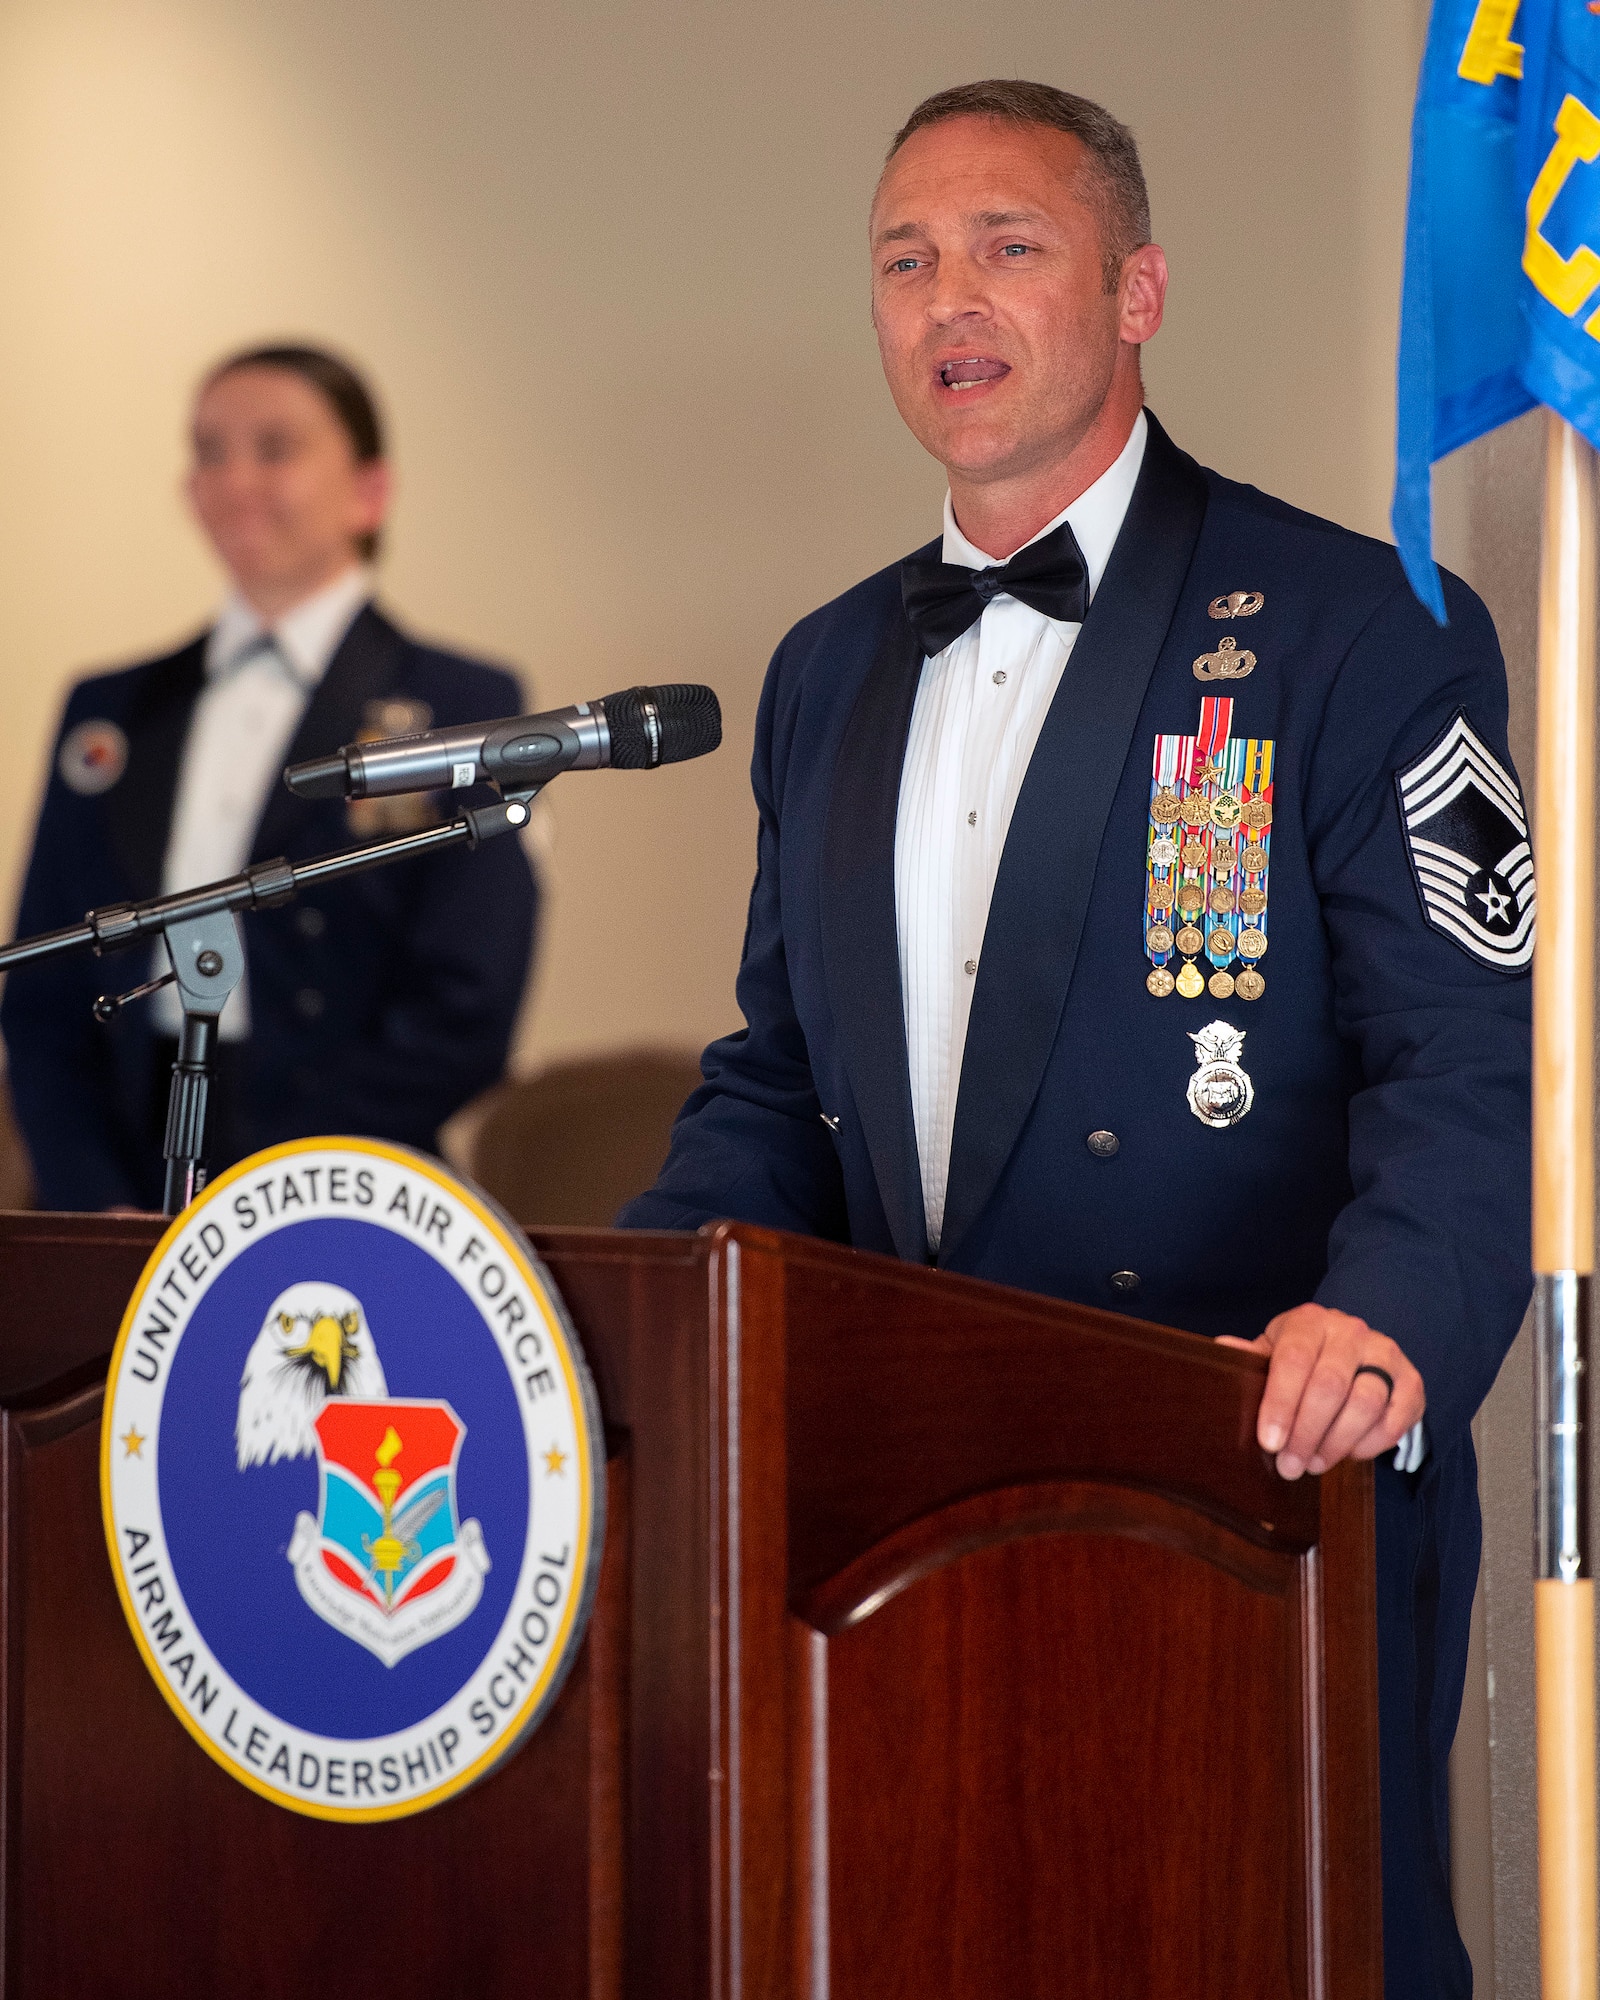 Chief Master Sgt. Justin Walker, 88th Security Forces Squadron senior enlisted leader, speaks at the Chief Master Sgt. Grace A. Peterson Airman Leadership School Class 22-E graduation ceremony, June 16, 2022, at Wright-Patterson Air Force Base, Ohio. Walker was the class’s mentor, providing advice and leadership throughout the course. (U.S. Air Force photo by R.J. Oriez)